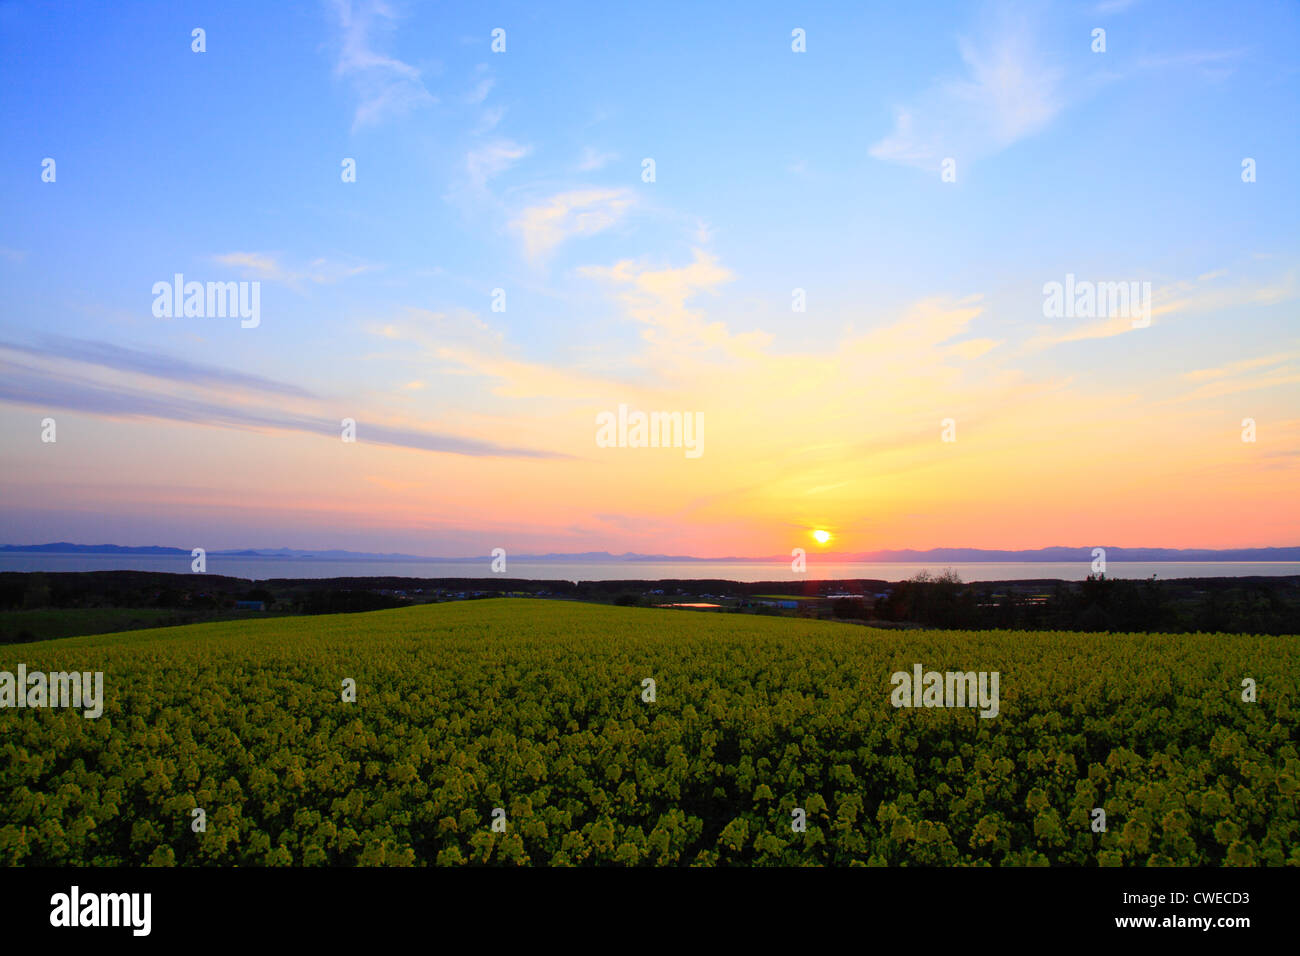 Majestic View Of Sunset Over Lush Forest Stock Photo